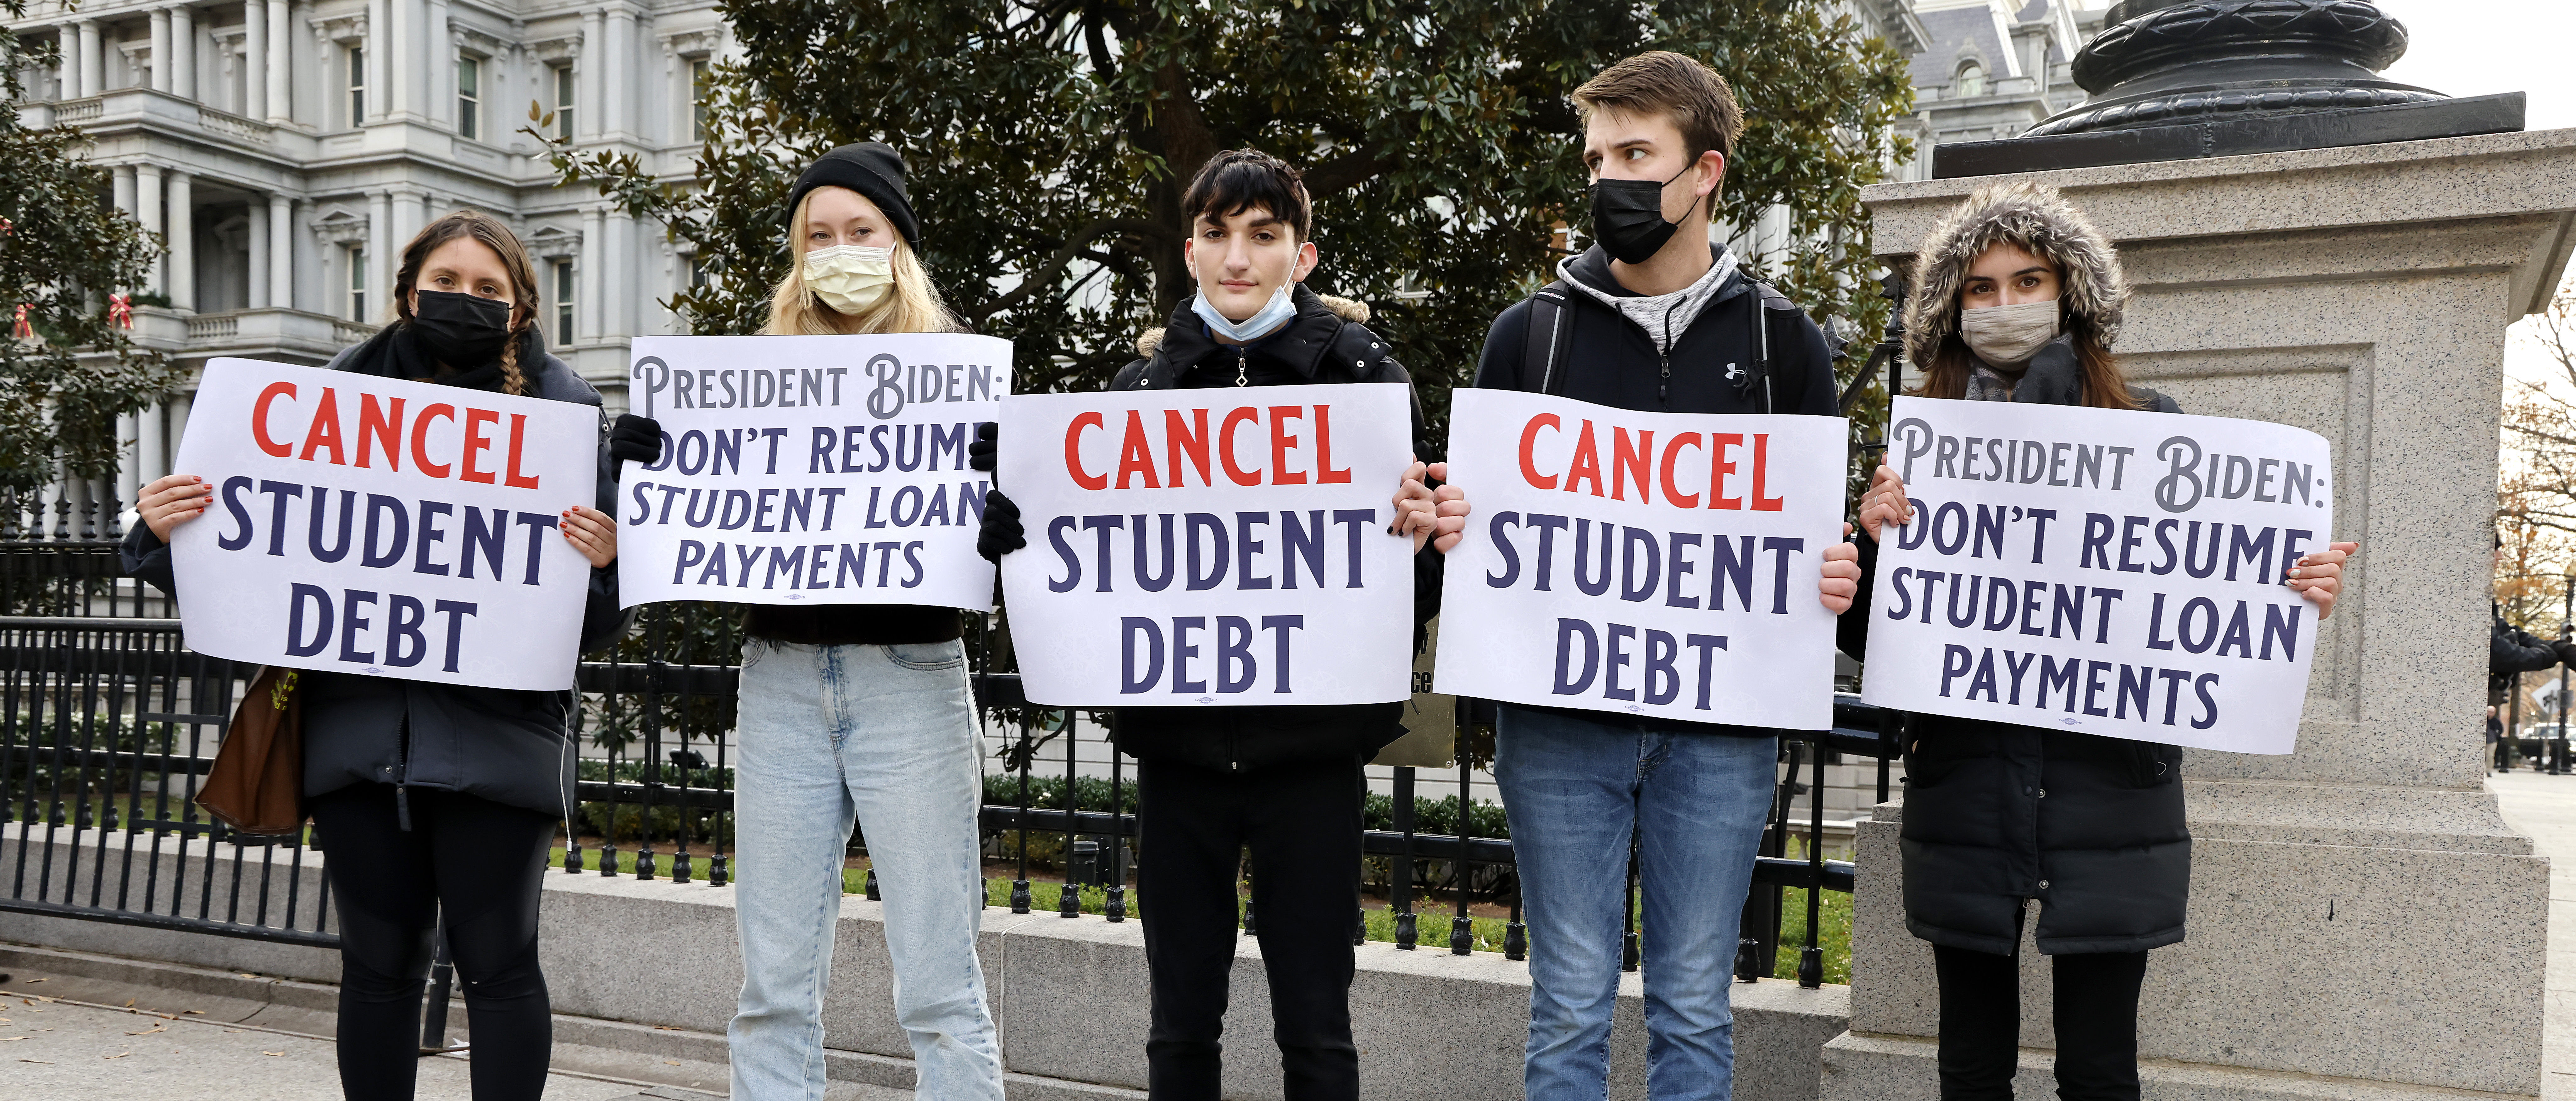 Democrats Are Pushing For Student Loan Forgiveness. Who Would It Benefit?